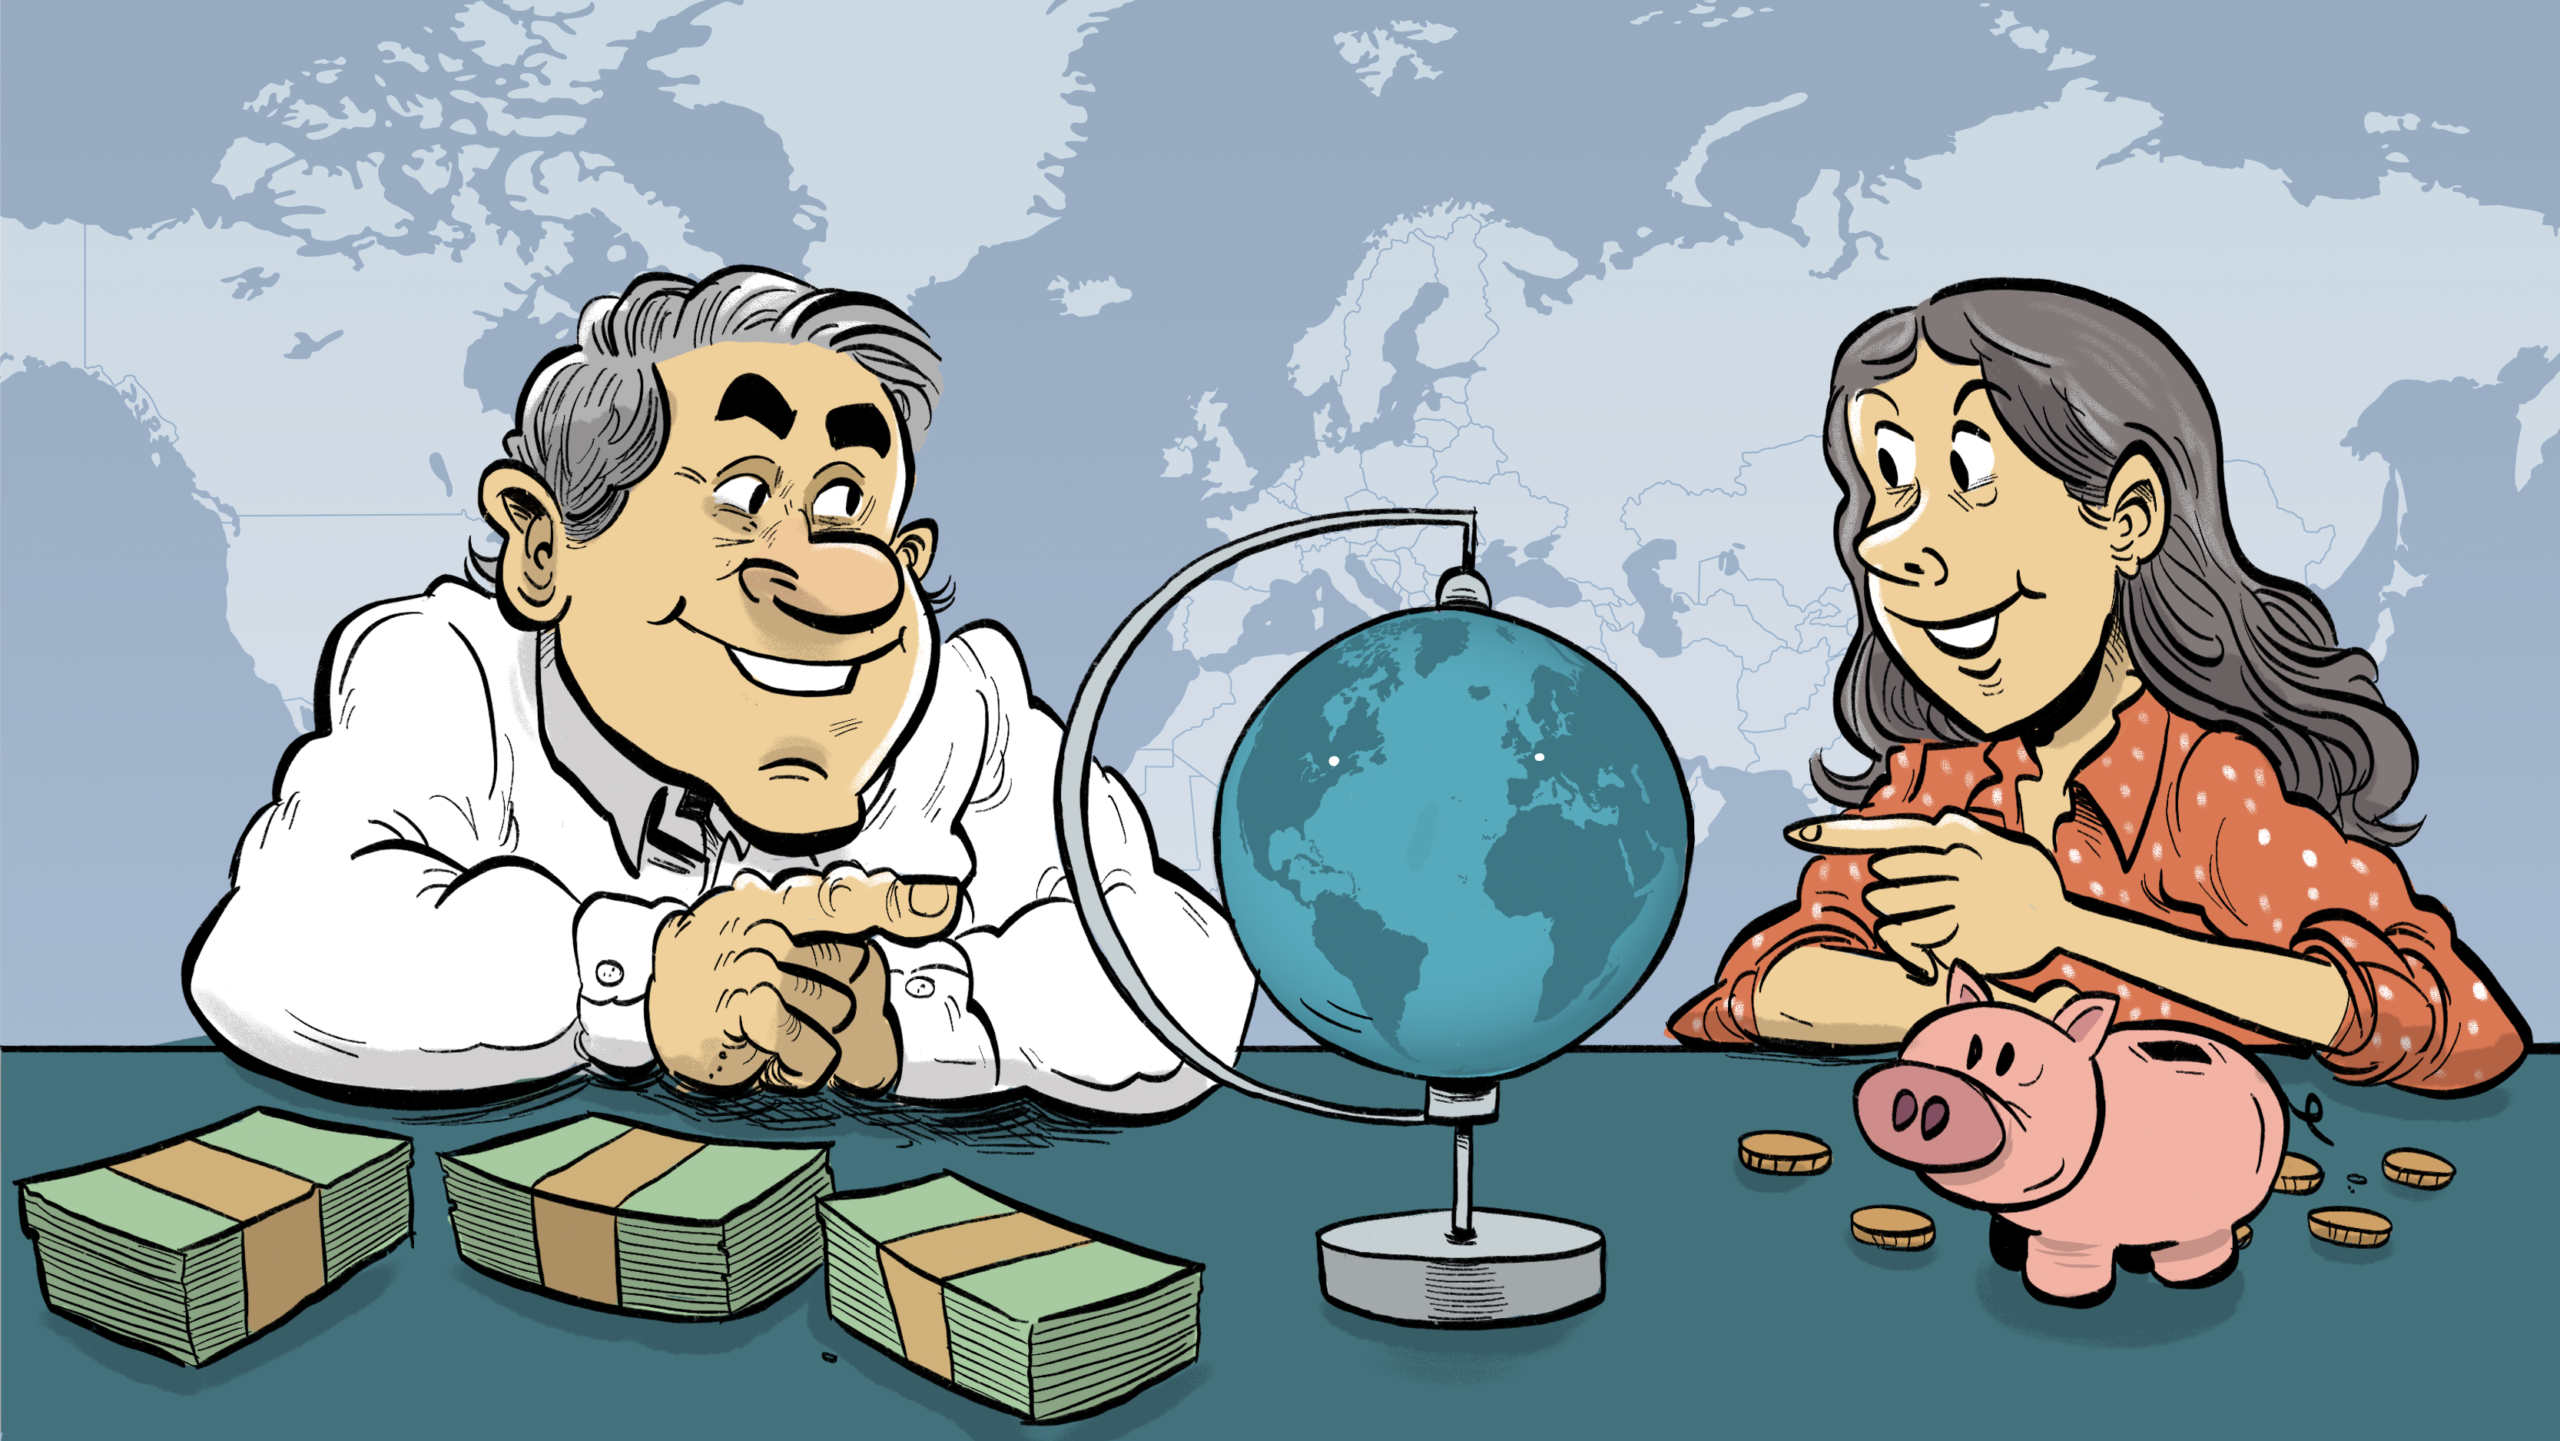 A man and a woman pointing to different parts of a globe, one looking to splurge on travelling and the other save.